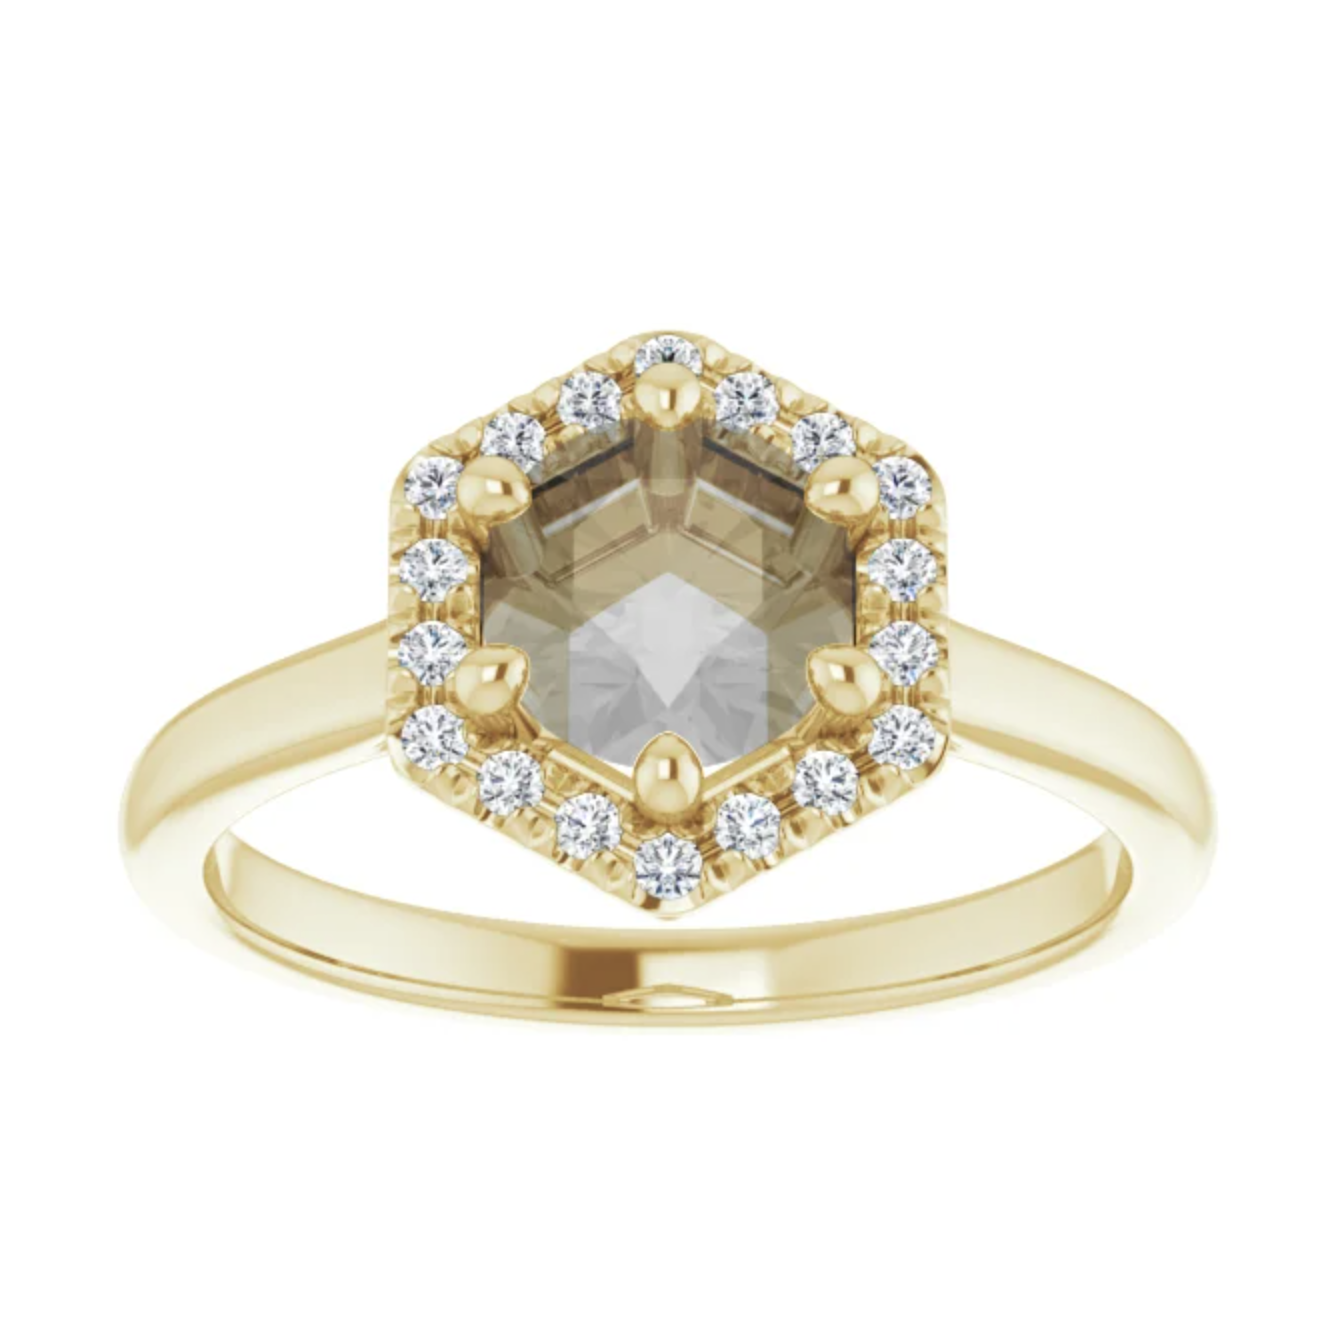 Sia setting - Midwinter Co. Alternative Bridal Rings and Modern Fine Jewelry